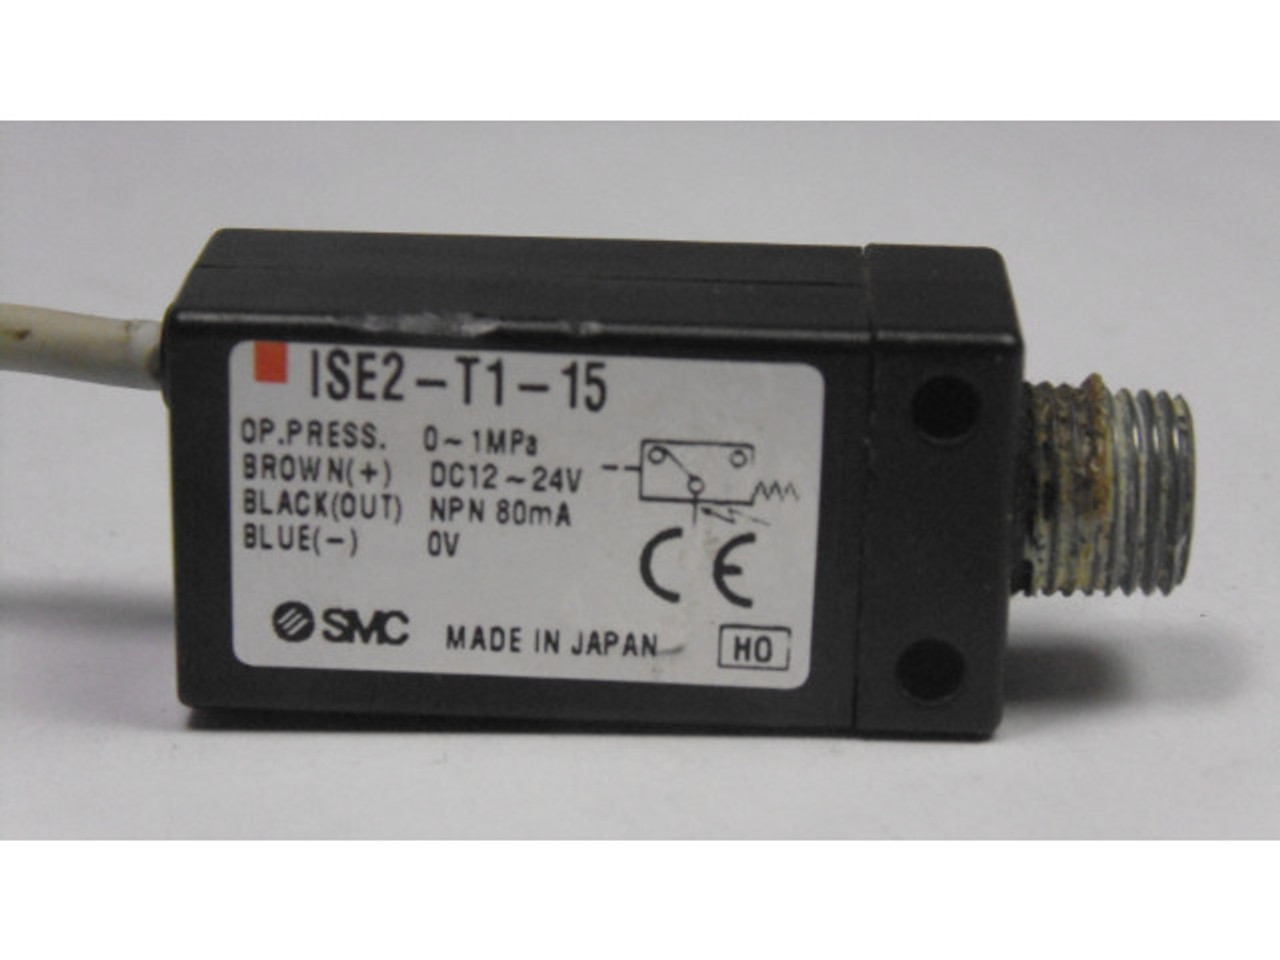 SMC ISE2-T1-15 Pressure Switch 0-1MPa USED